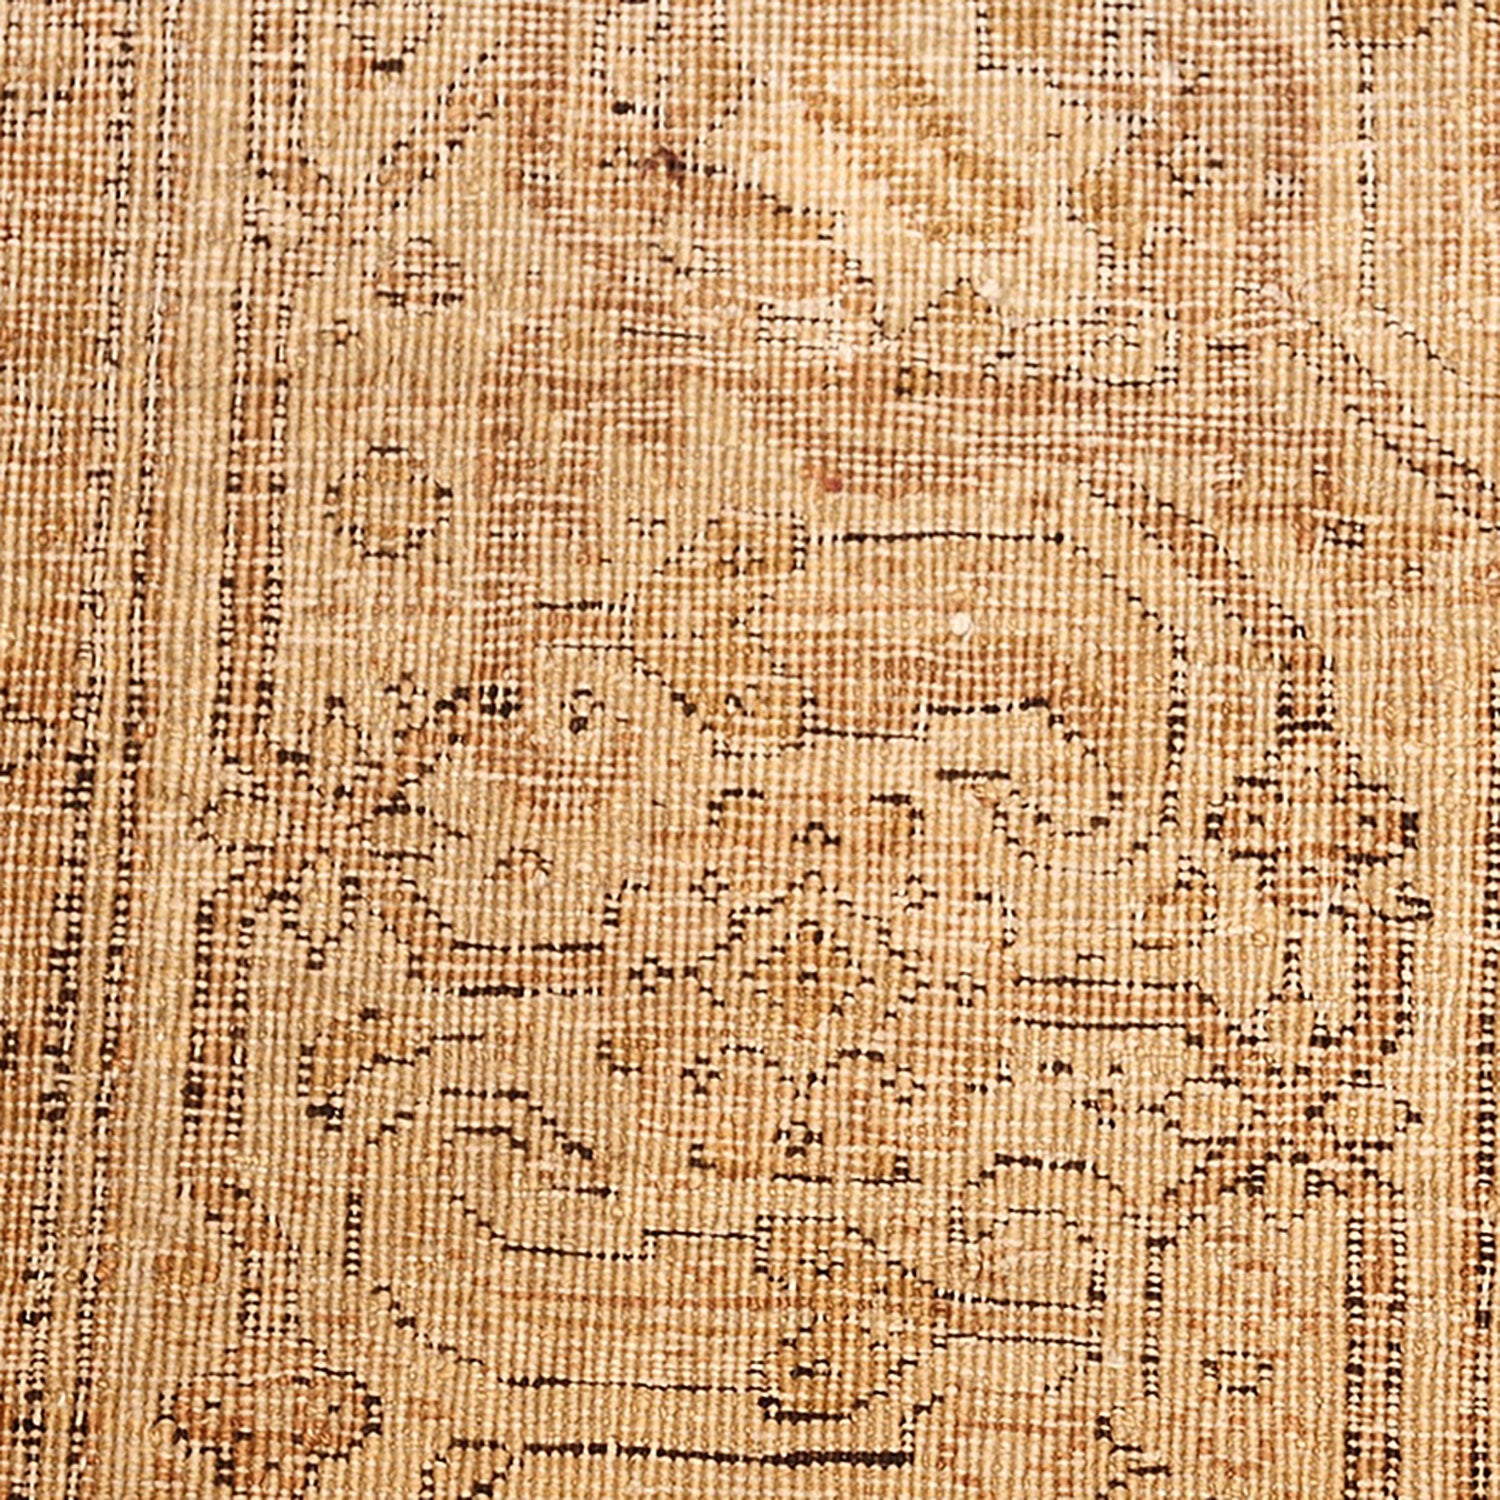 Close-up of intricate woven rug or tapestry with floral motifs.